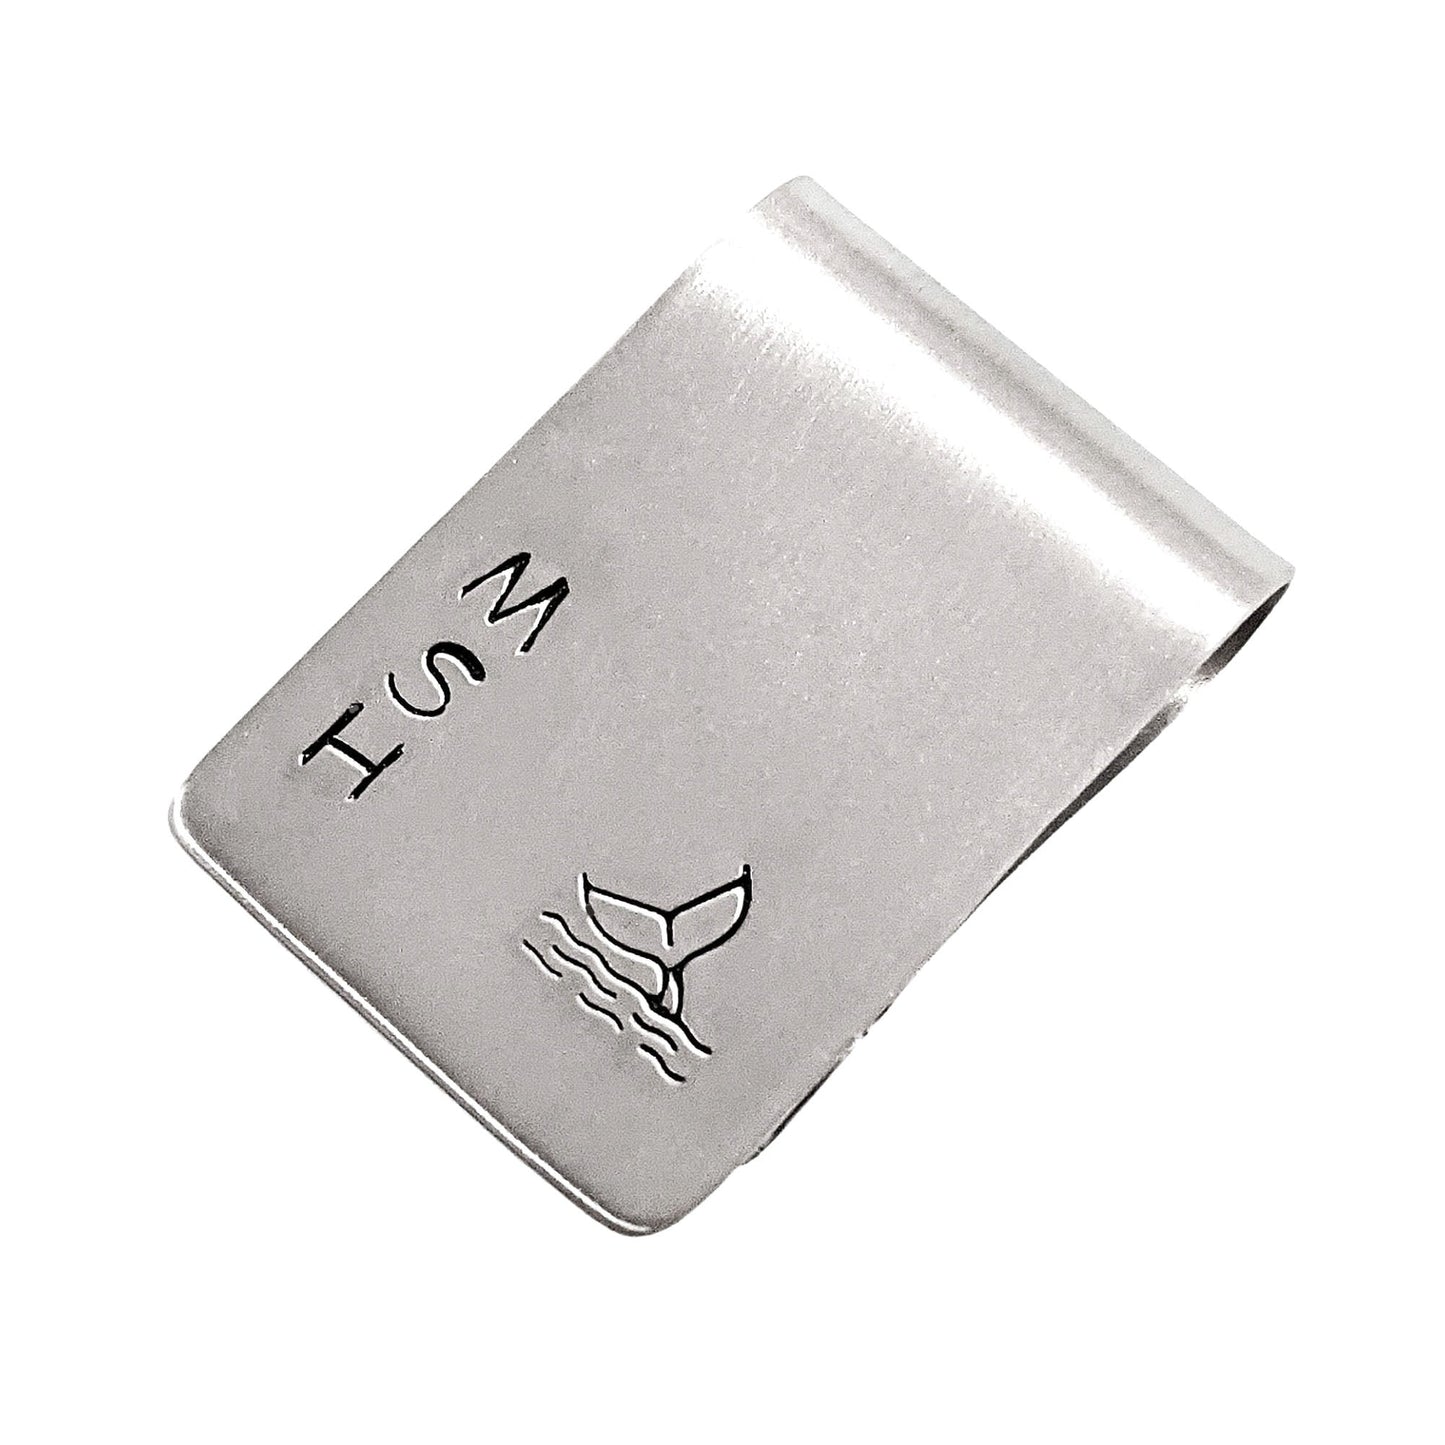 Money clip showing sample of how it can be personalized with initials.